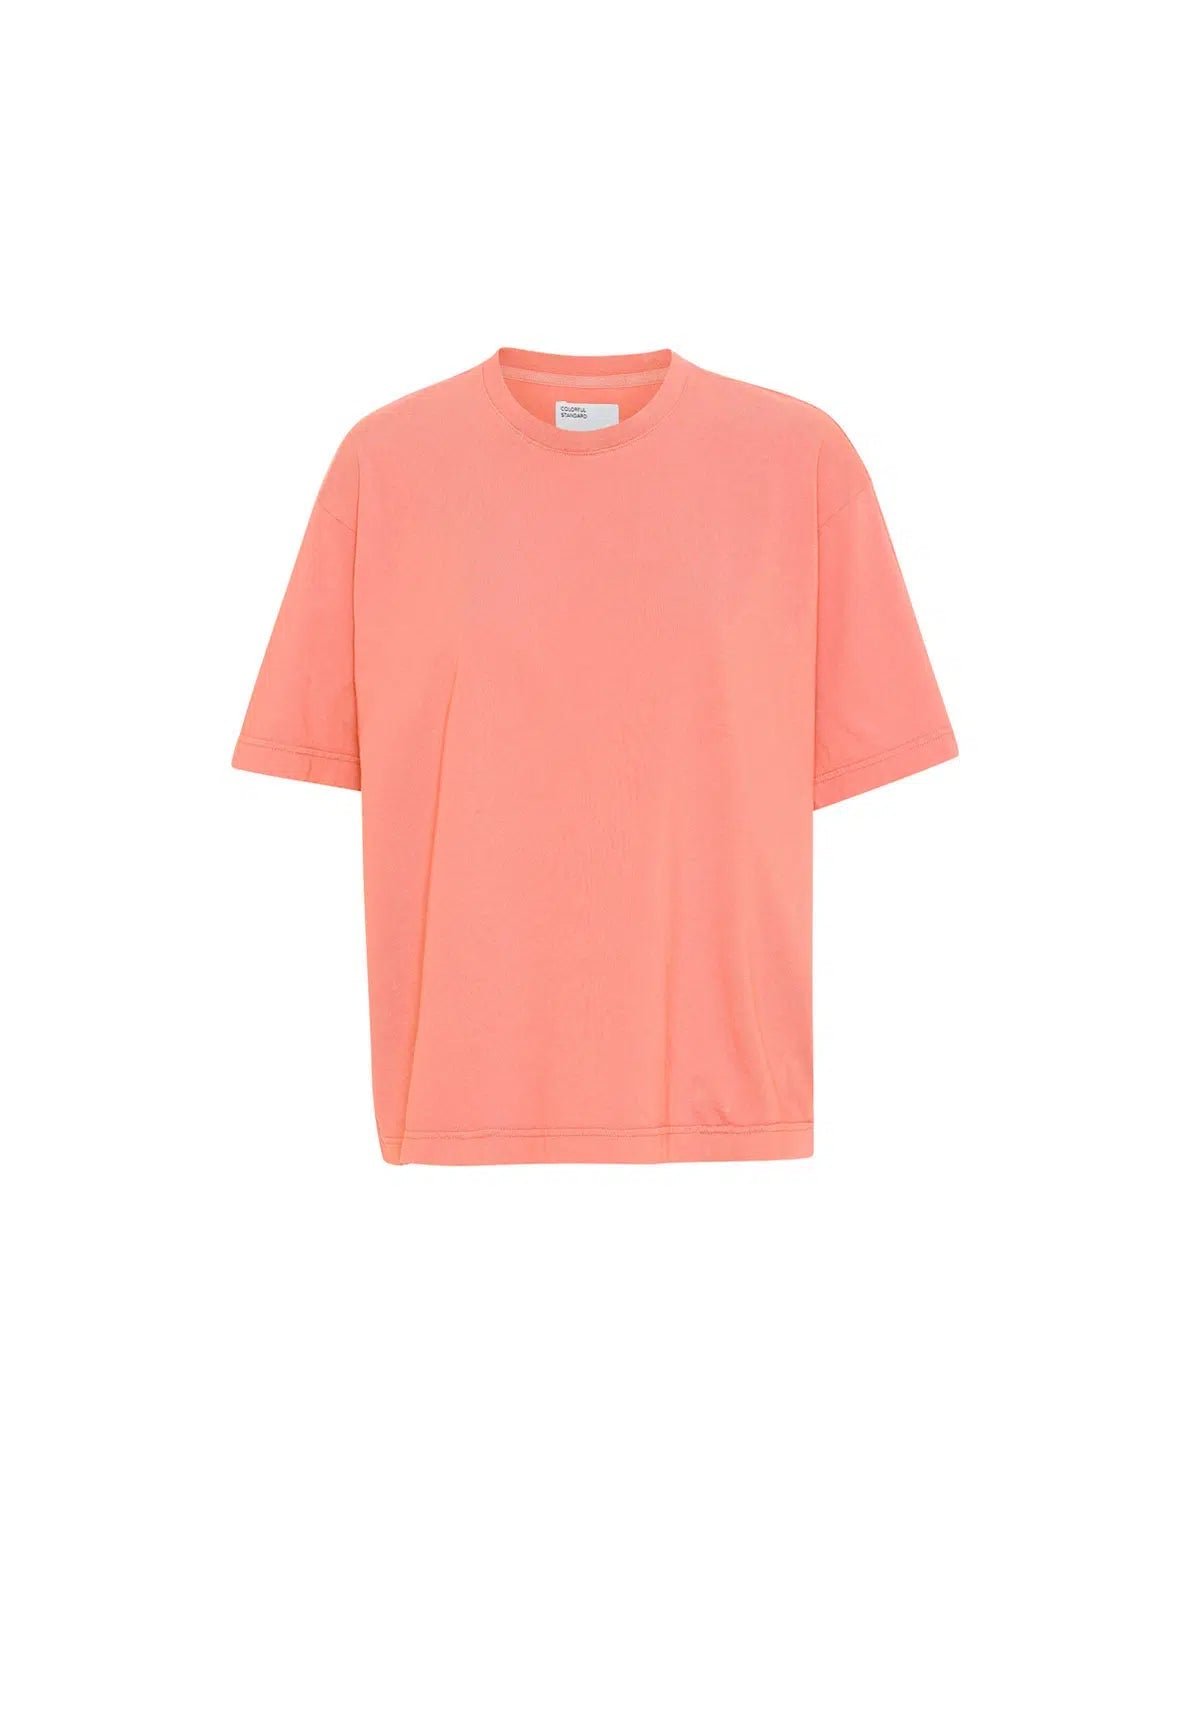 OVERSIZED T-SHIRT BRIGHT CORAL